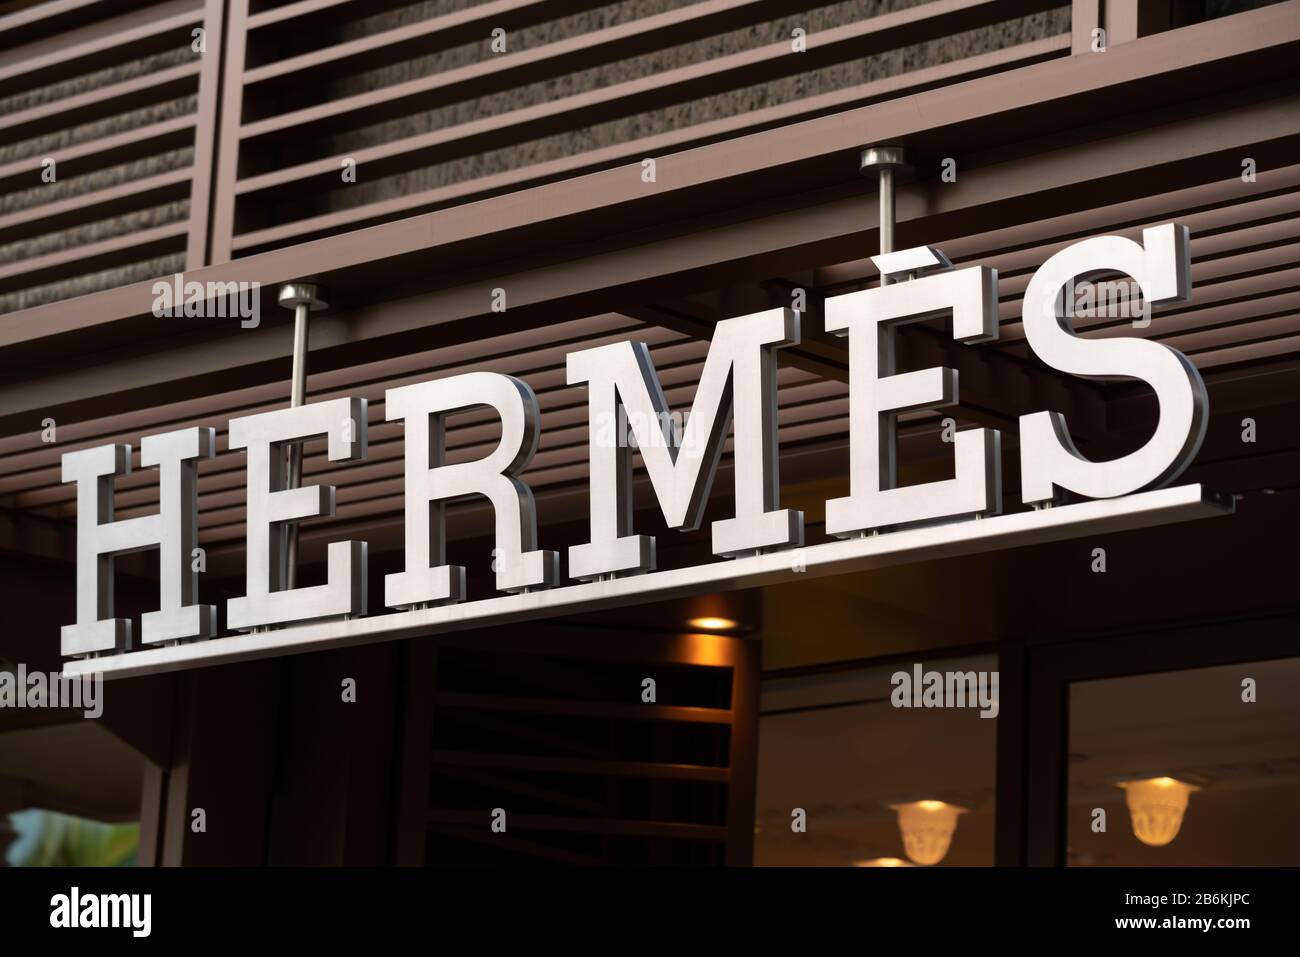 A view of a French high fashion luxury goods manufacturer Hermes logo ...